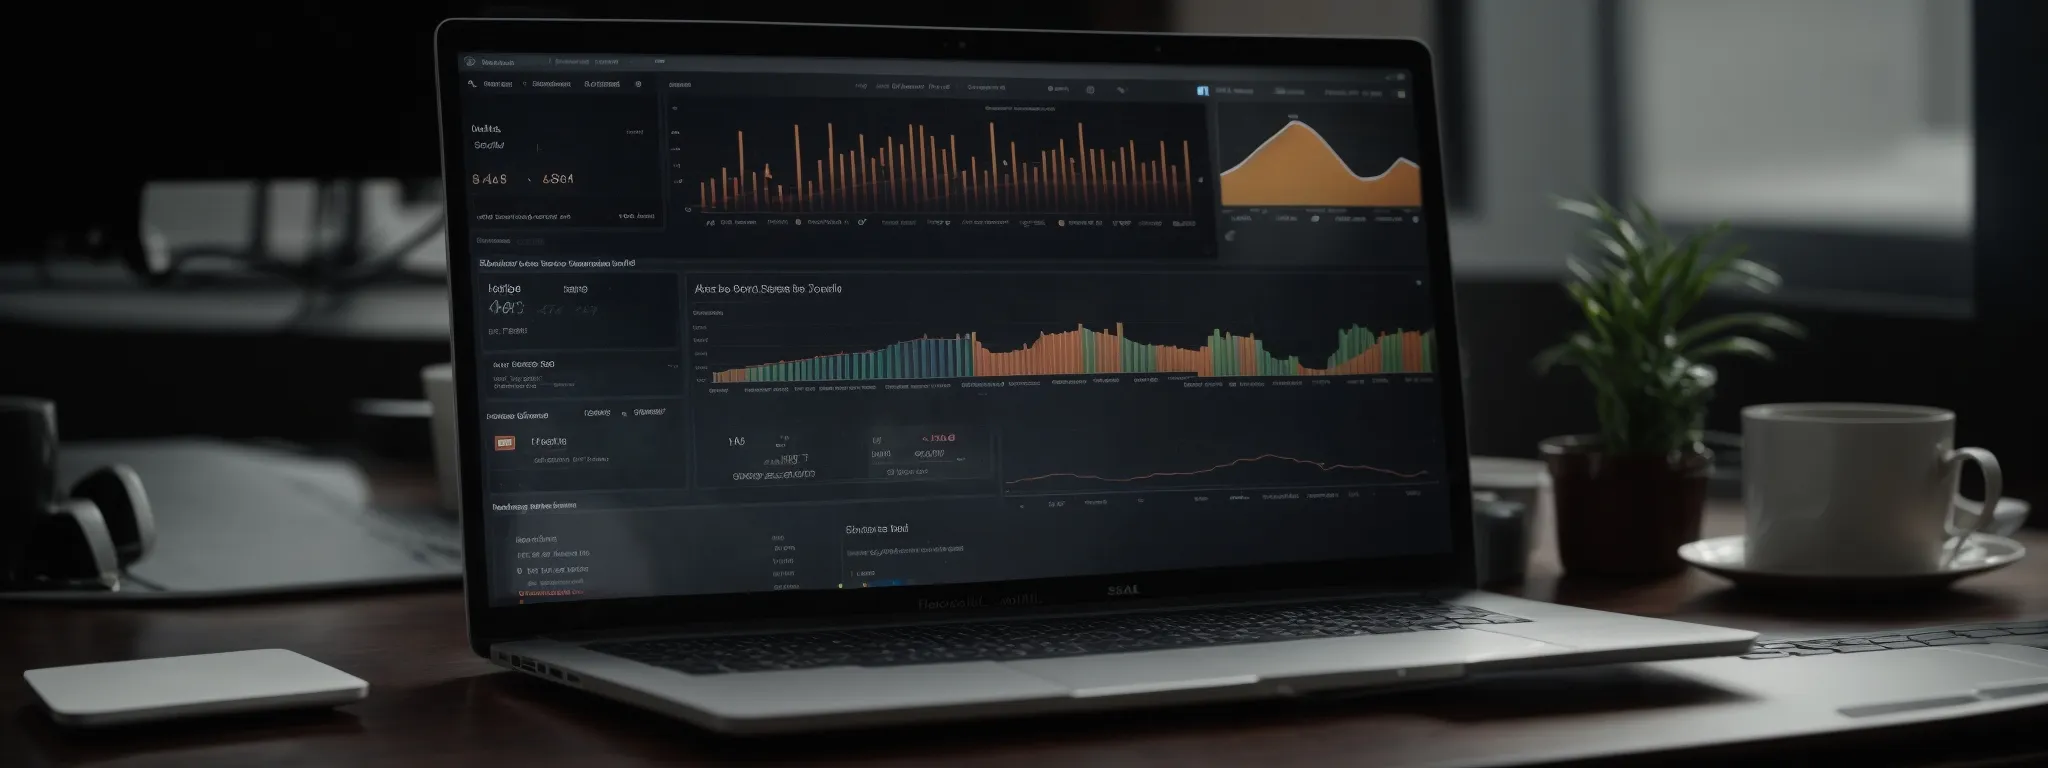 a desktop with an open laptop showing graphs and analytics on the screen, representing the innovative seo tool searchatlas in action.